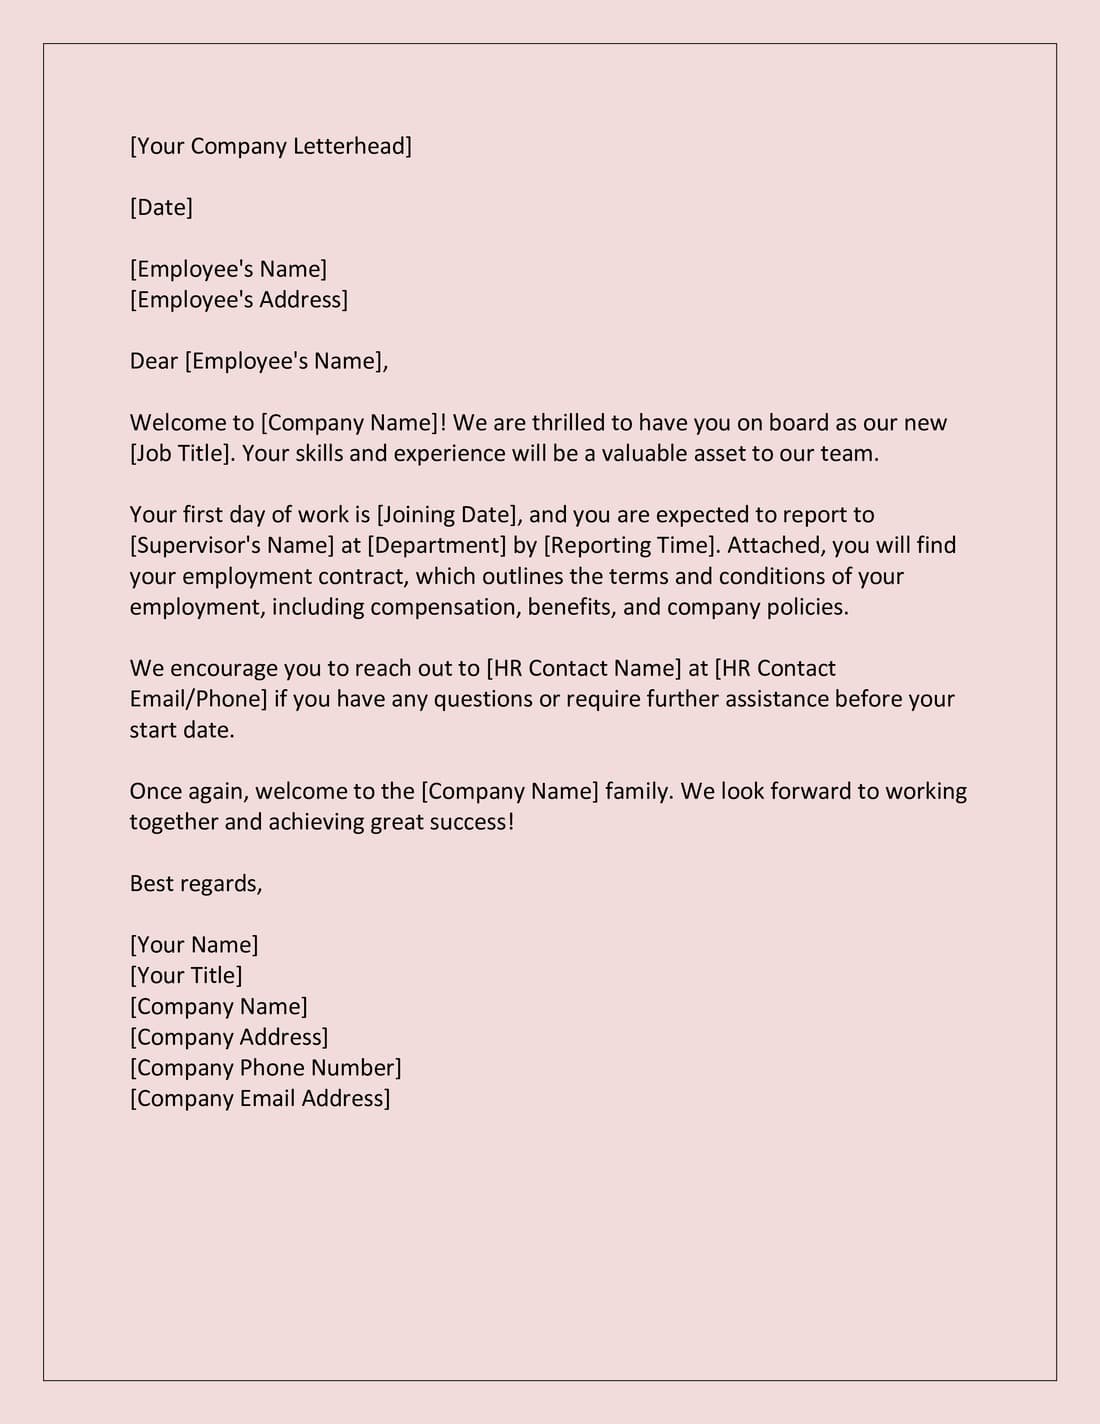 Job Joining Letter with Welcome Message